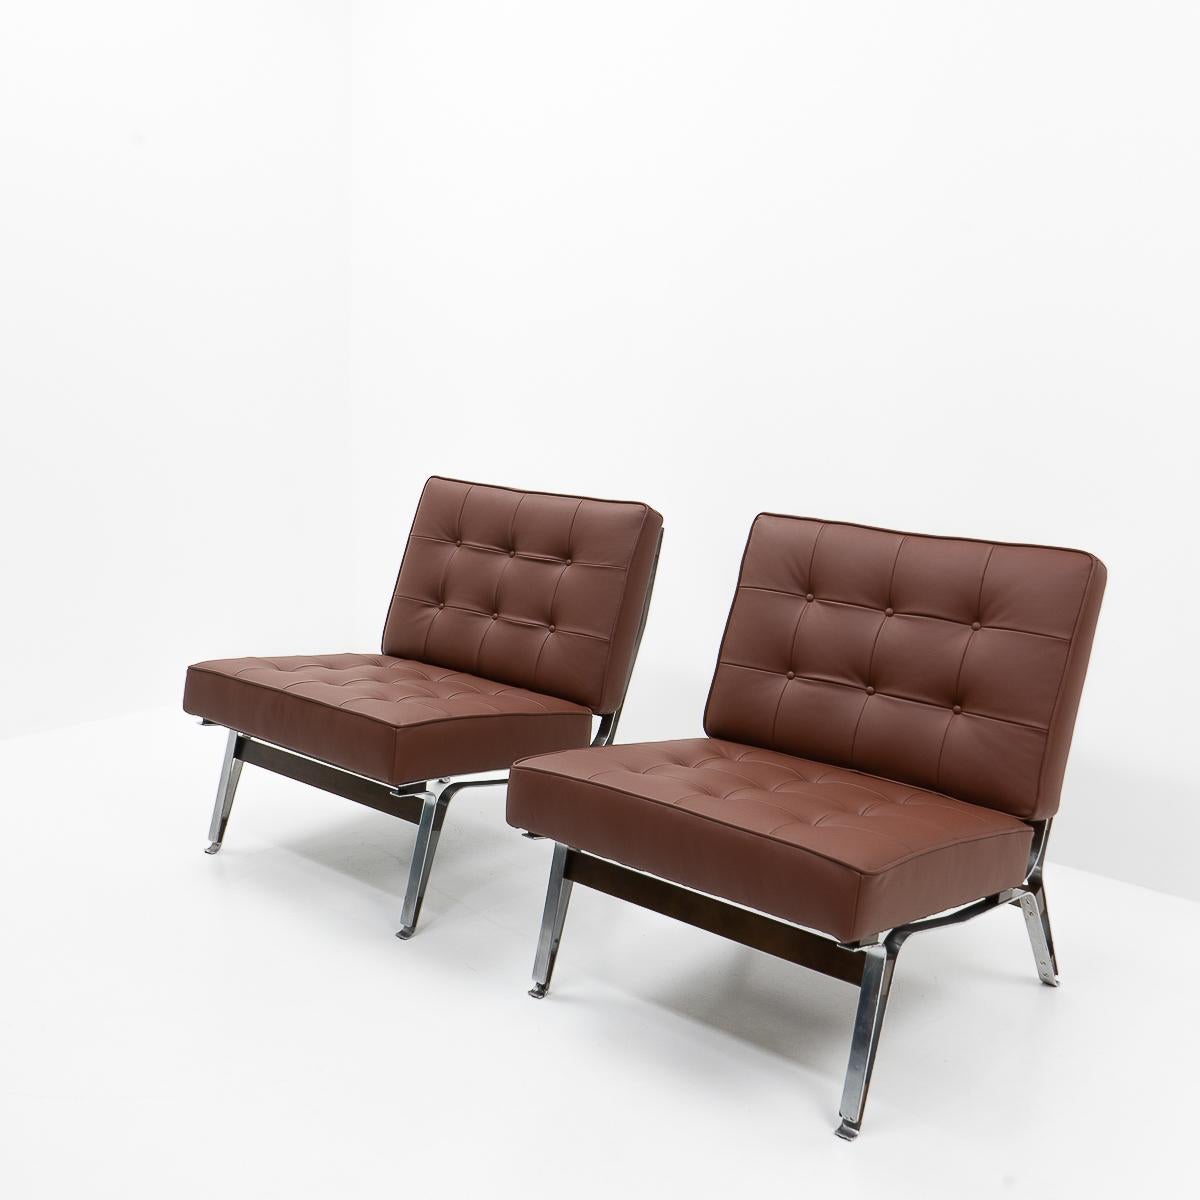 Mid-20th Century Rare Italian Design: Ico Parisi 856 Lounge Chairs for Cassina, 1950s For Sale